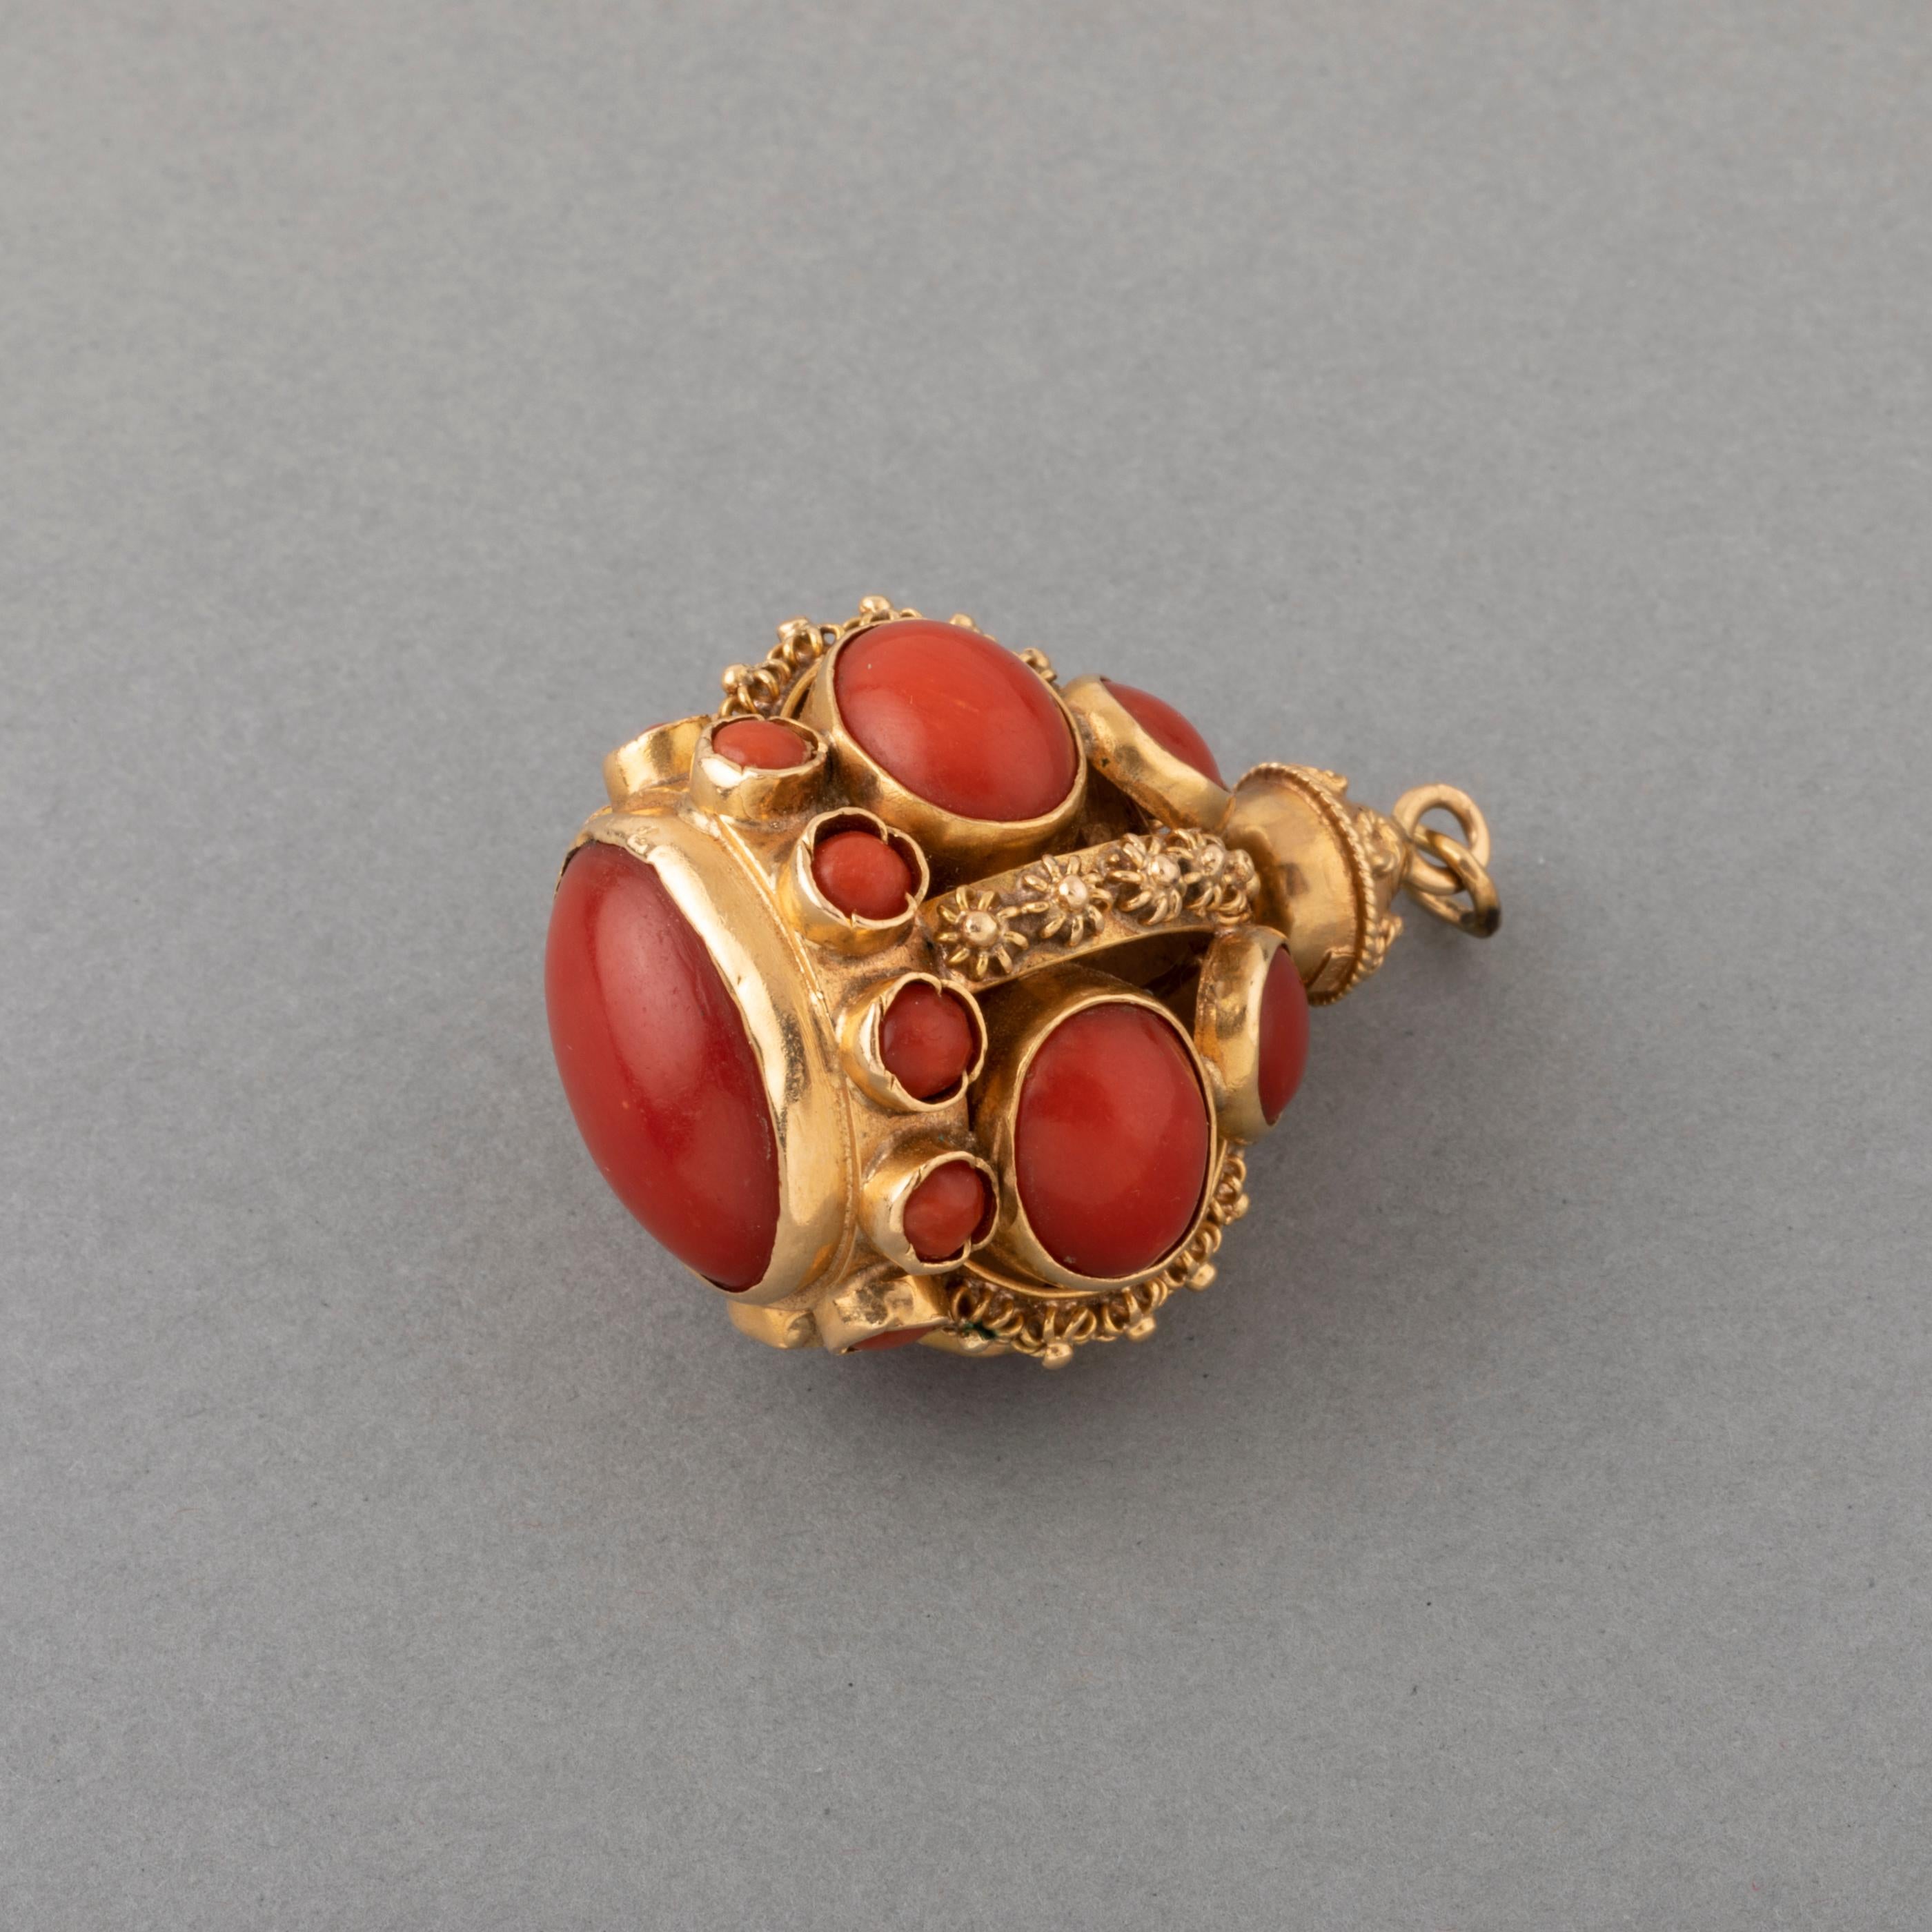 Gold and Coral Vintage Charm

Very beautiful charm, made in Italy circa 1960.
Made in yellow gold 18k (mark for gold).
The condition is good.
Set with mediterranean  red coral. The coral a intense color, is is quality.
Dimensions: 3.5*2.6 cm 
Total